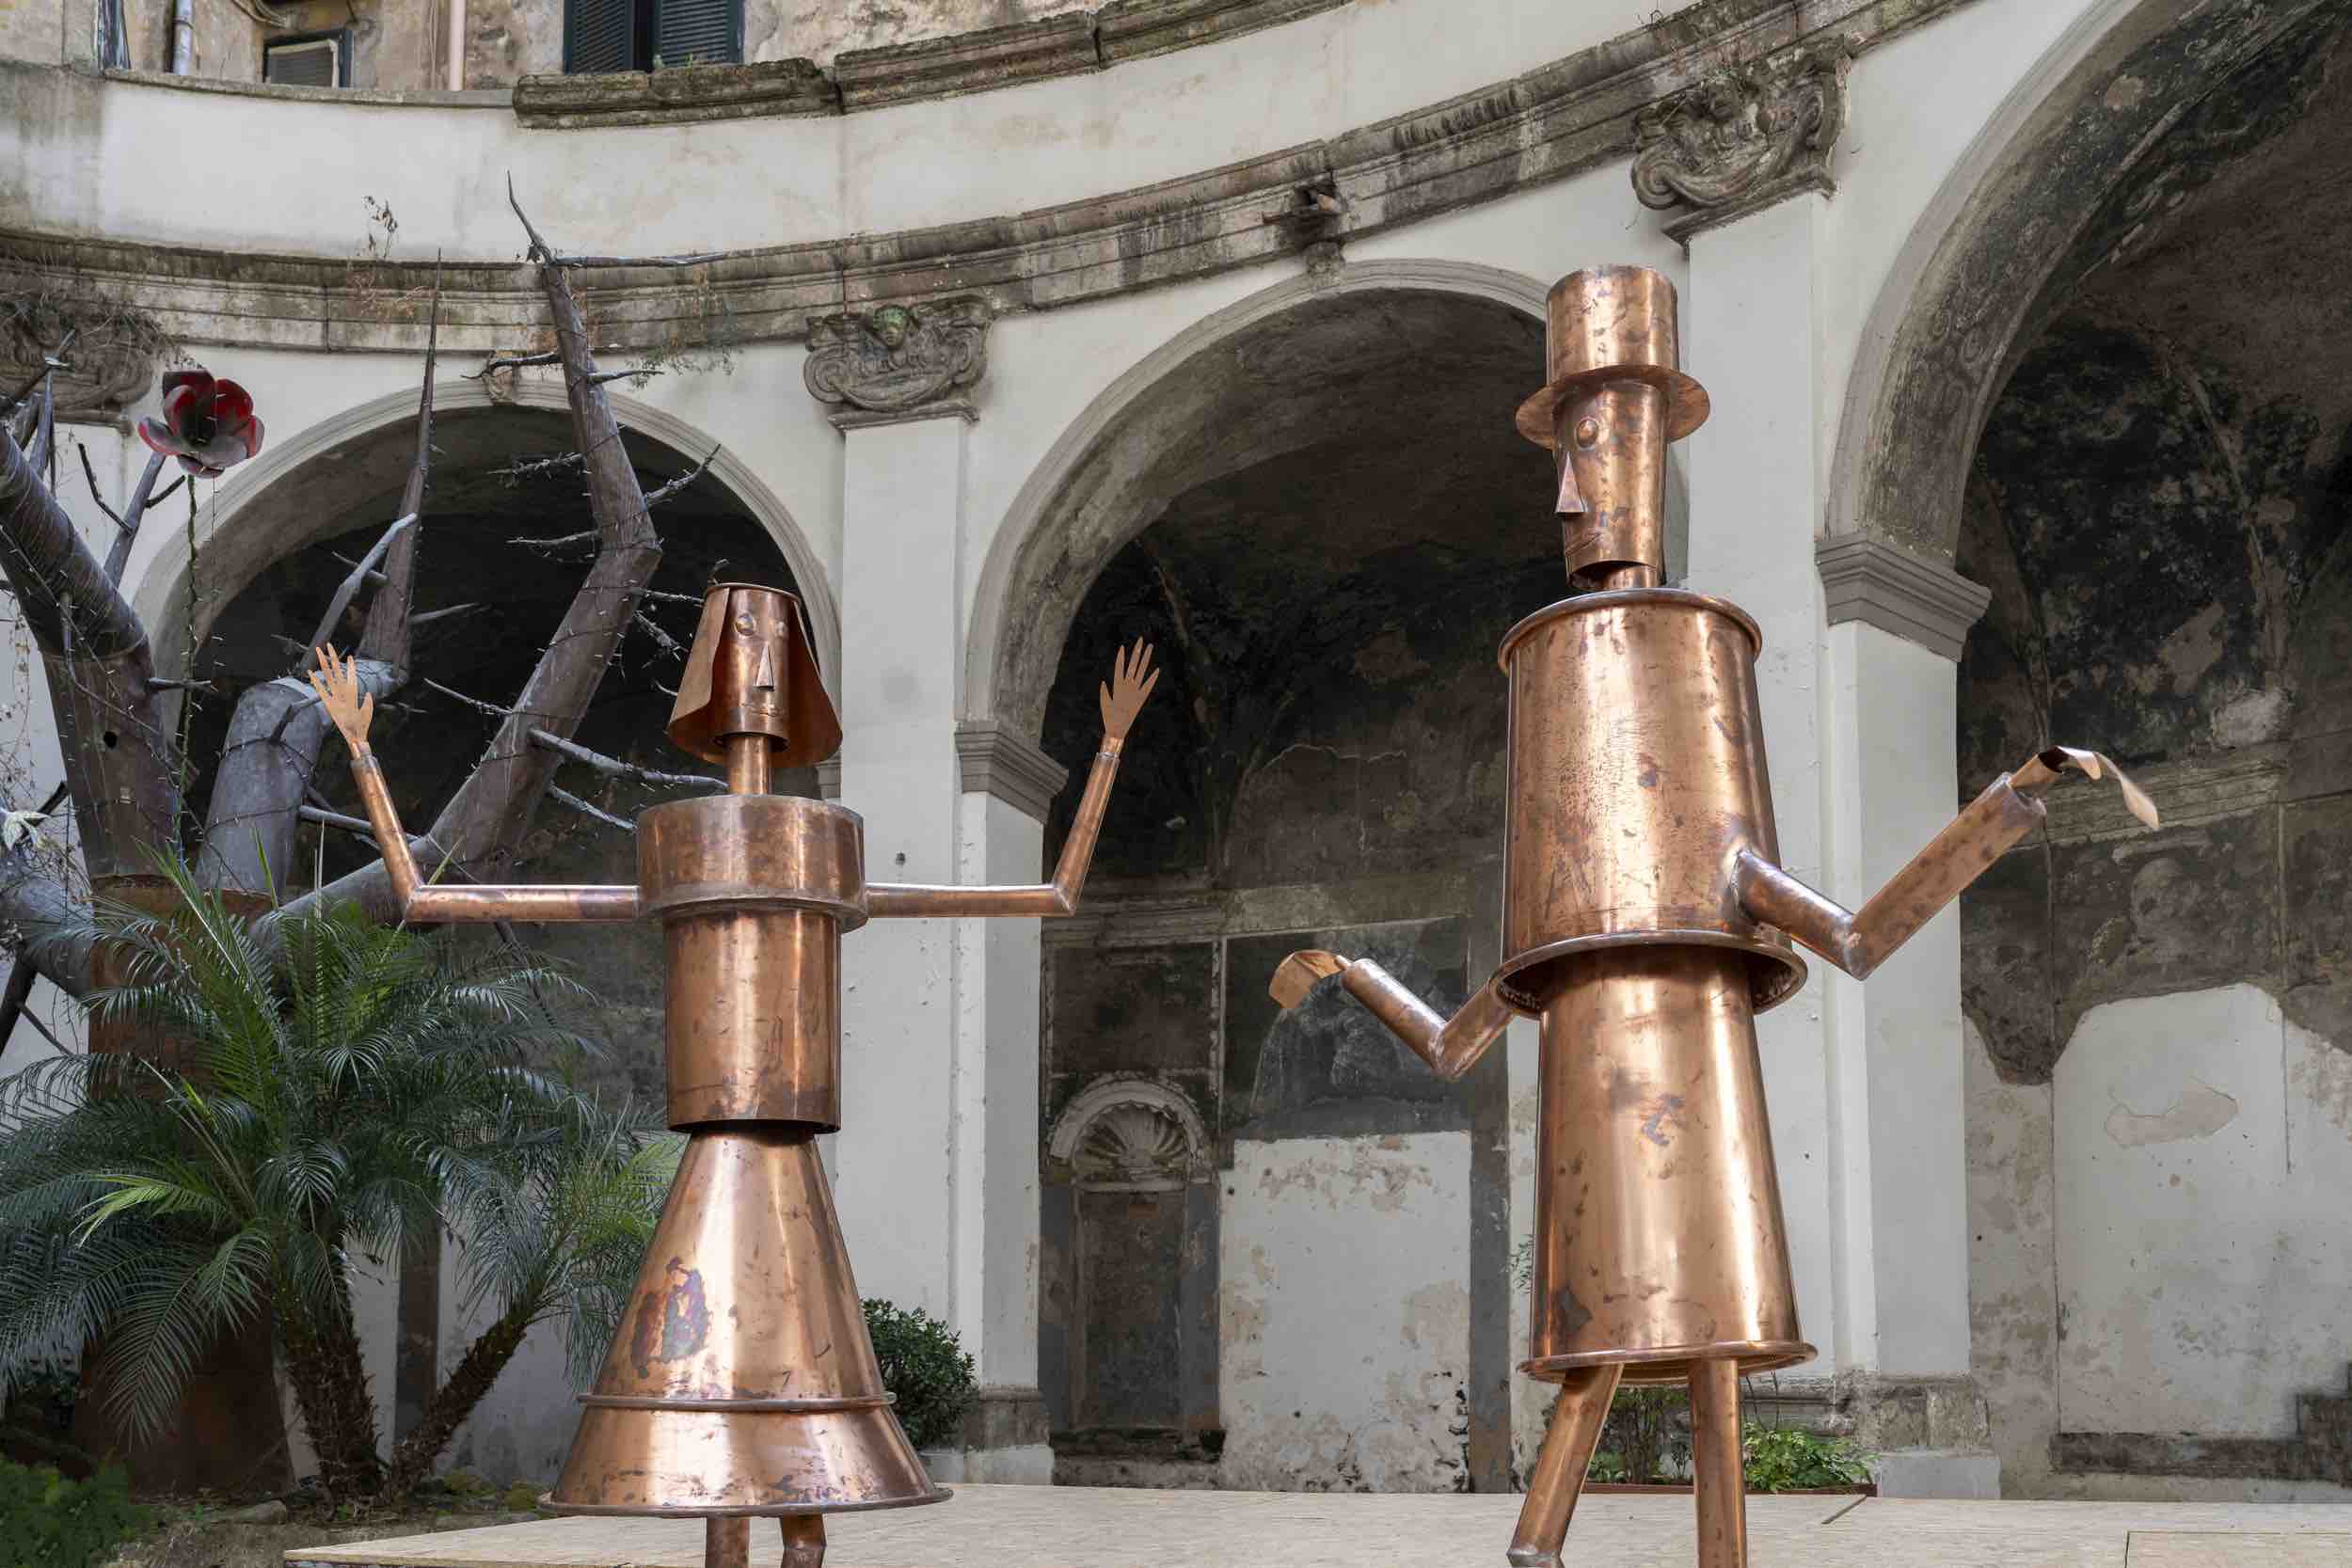 Two coffee pots by Riccardo Dalisi: redesigning a ritual, on Domus